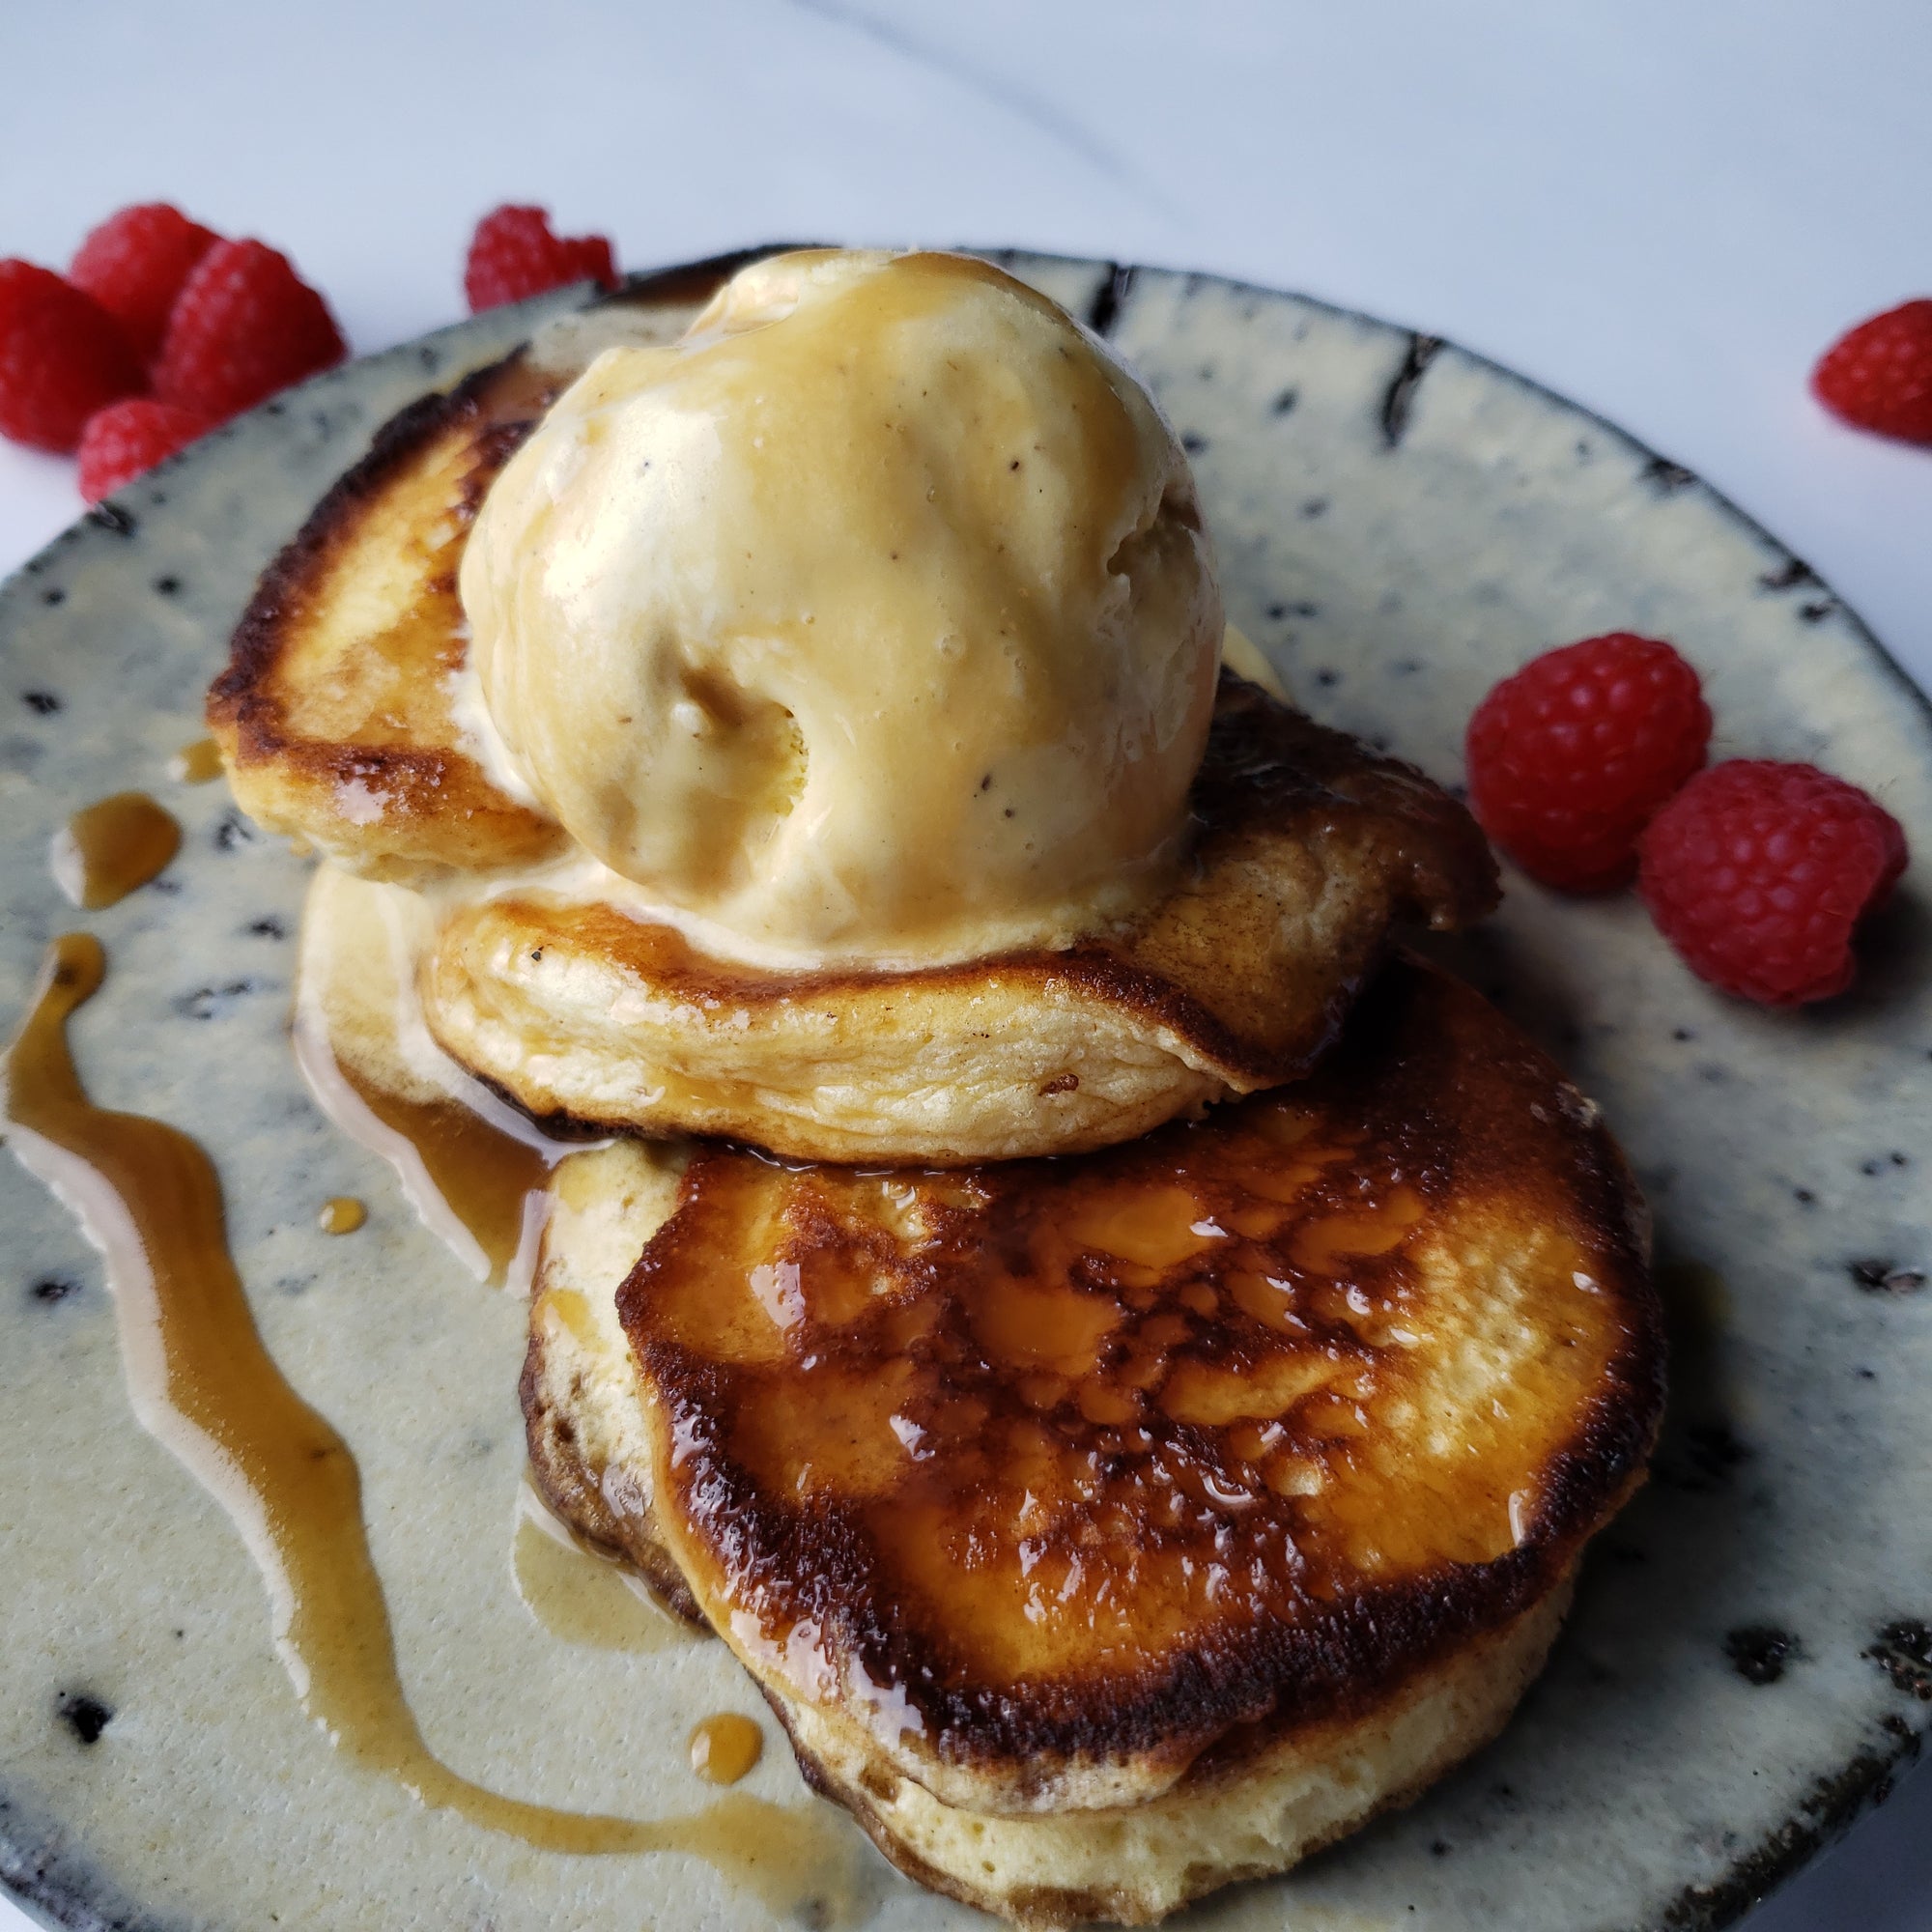 American-style fluffy pancakes with ice-cream and a warm salted butterscotch sauce.